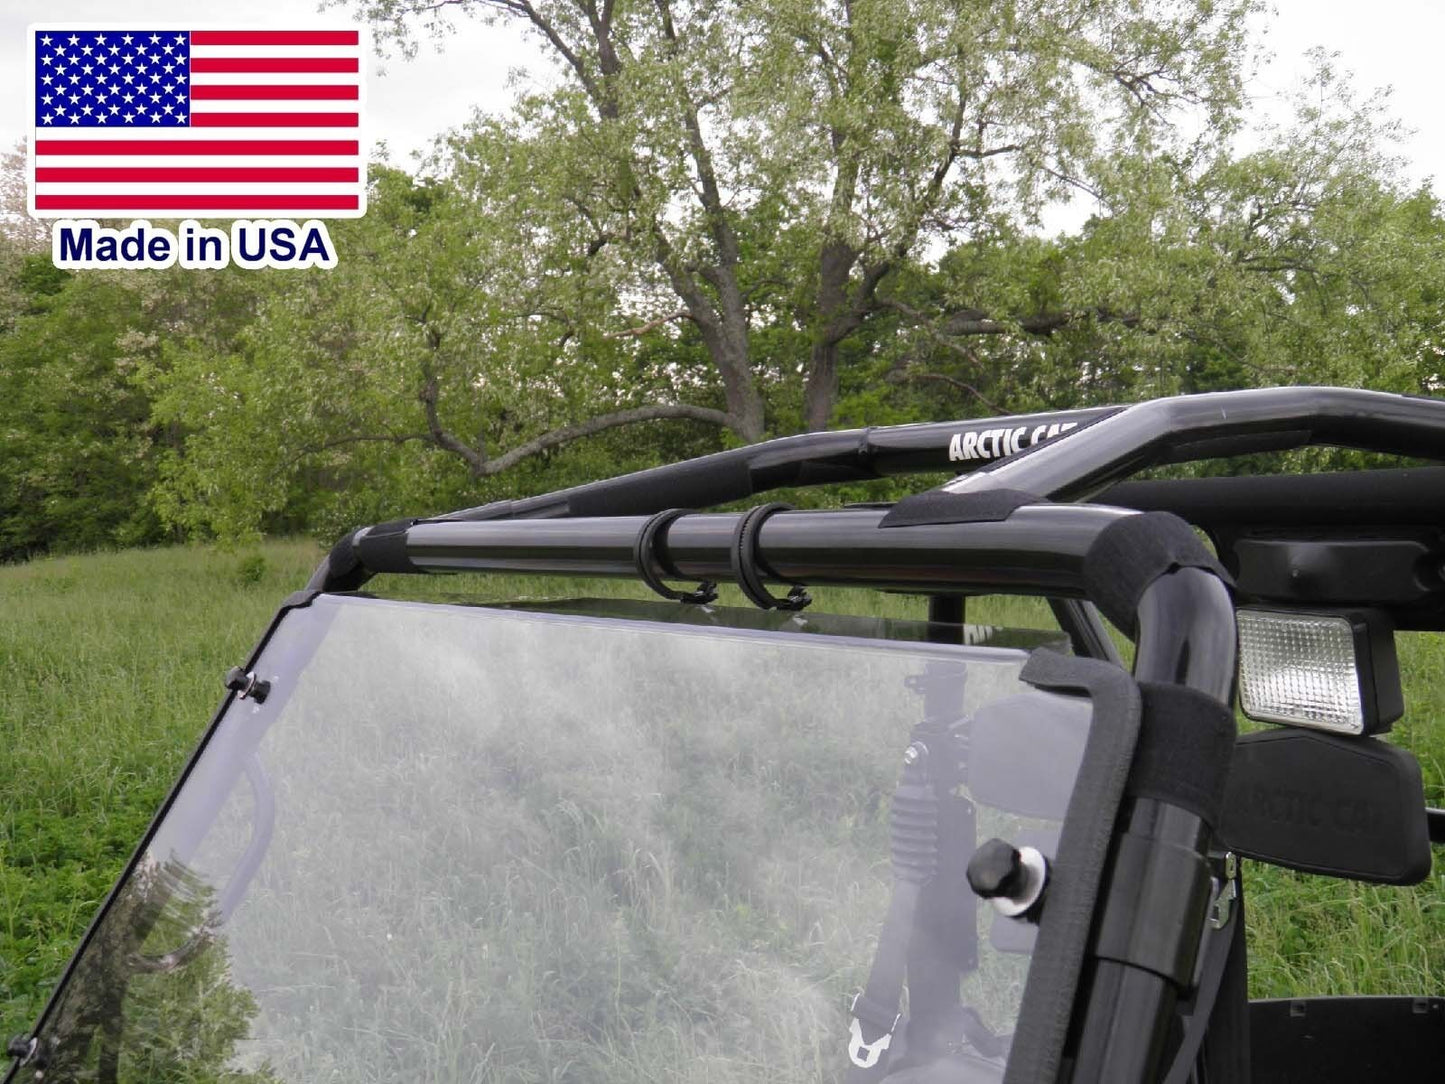 Arctic Cat Prowler HARD WINDSHIELD - Travels Highway Speed - Commercial Duty